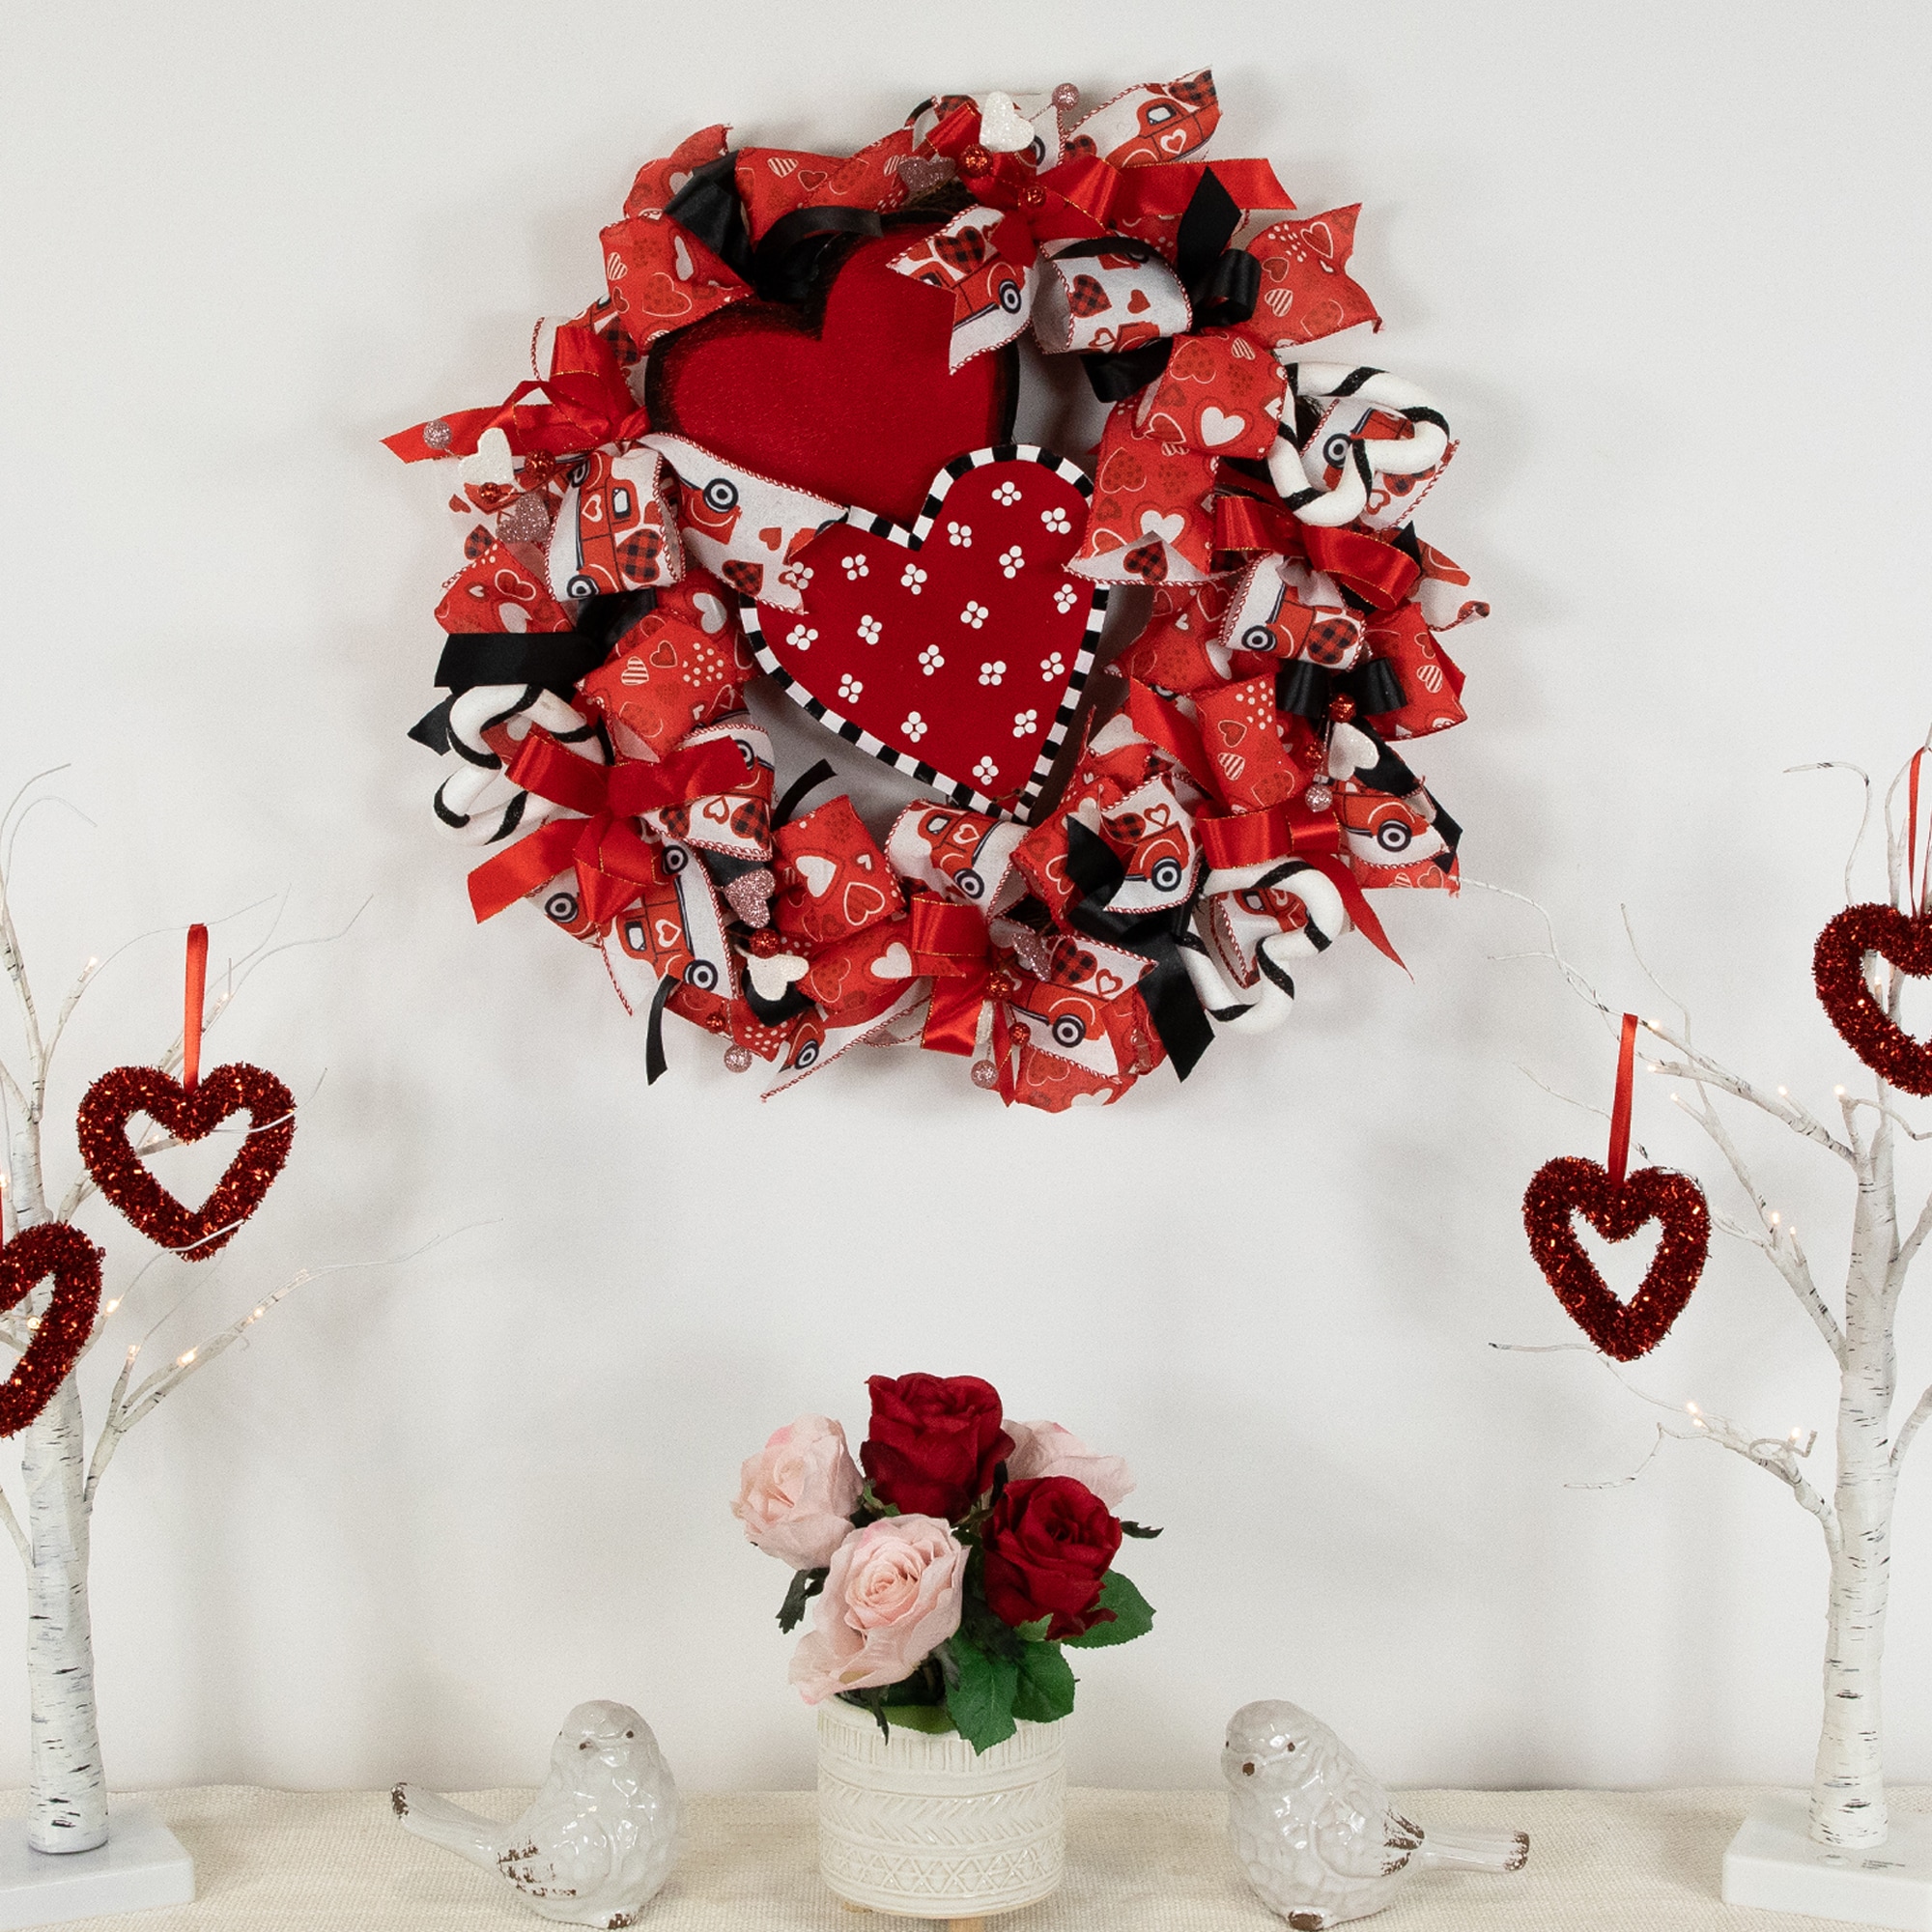 Glitzhome 17 Lighted Valentine's Berry Heart Wreath - Red